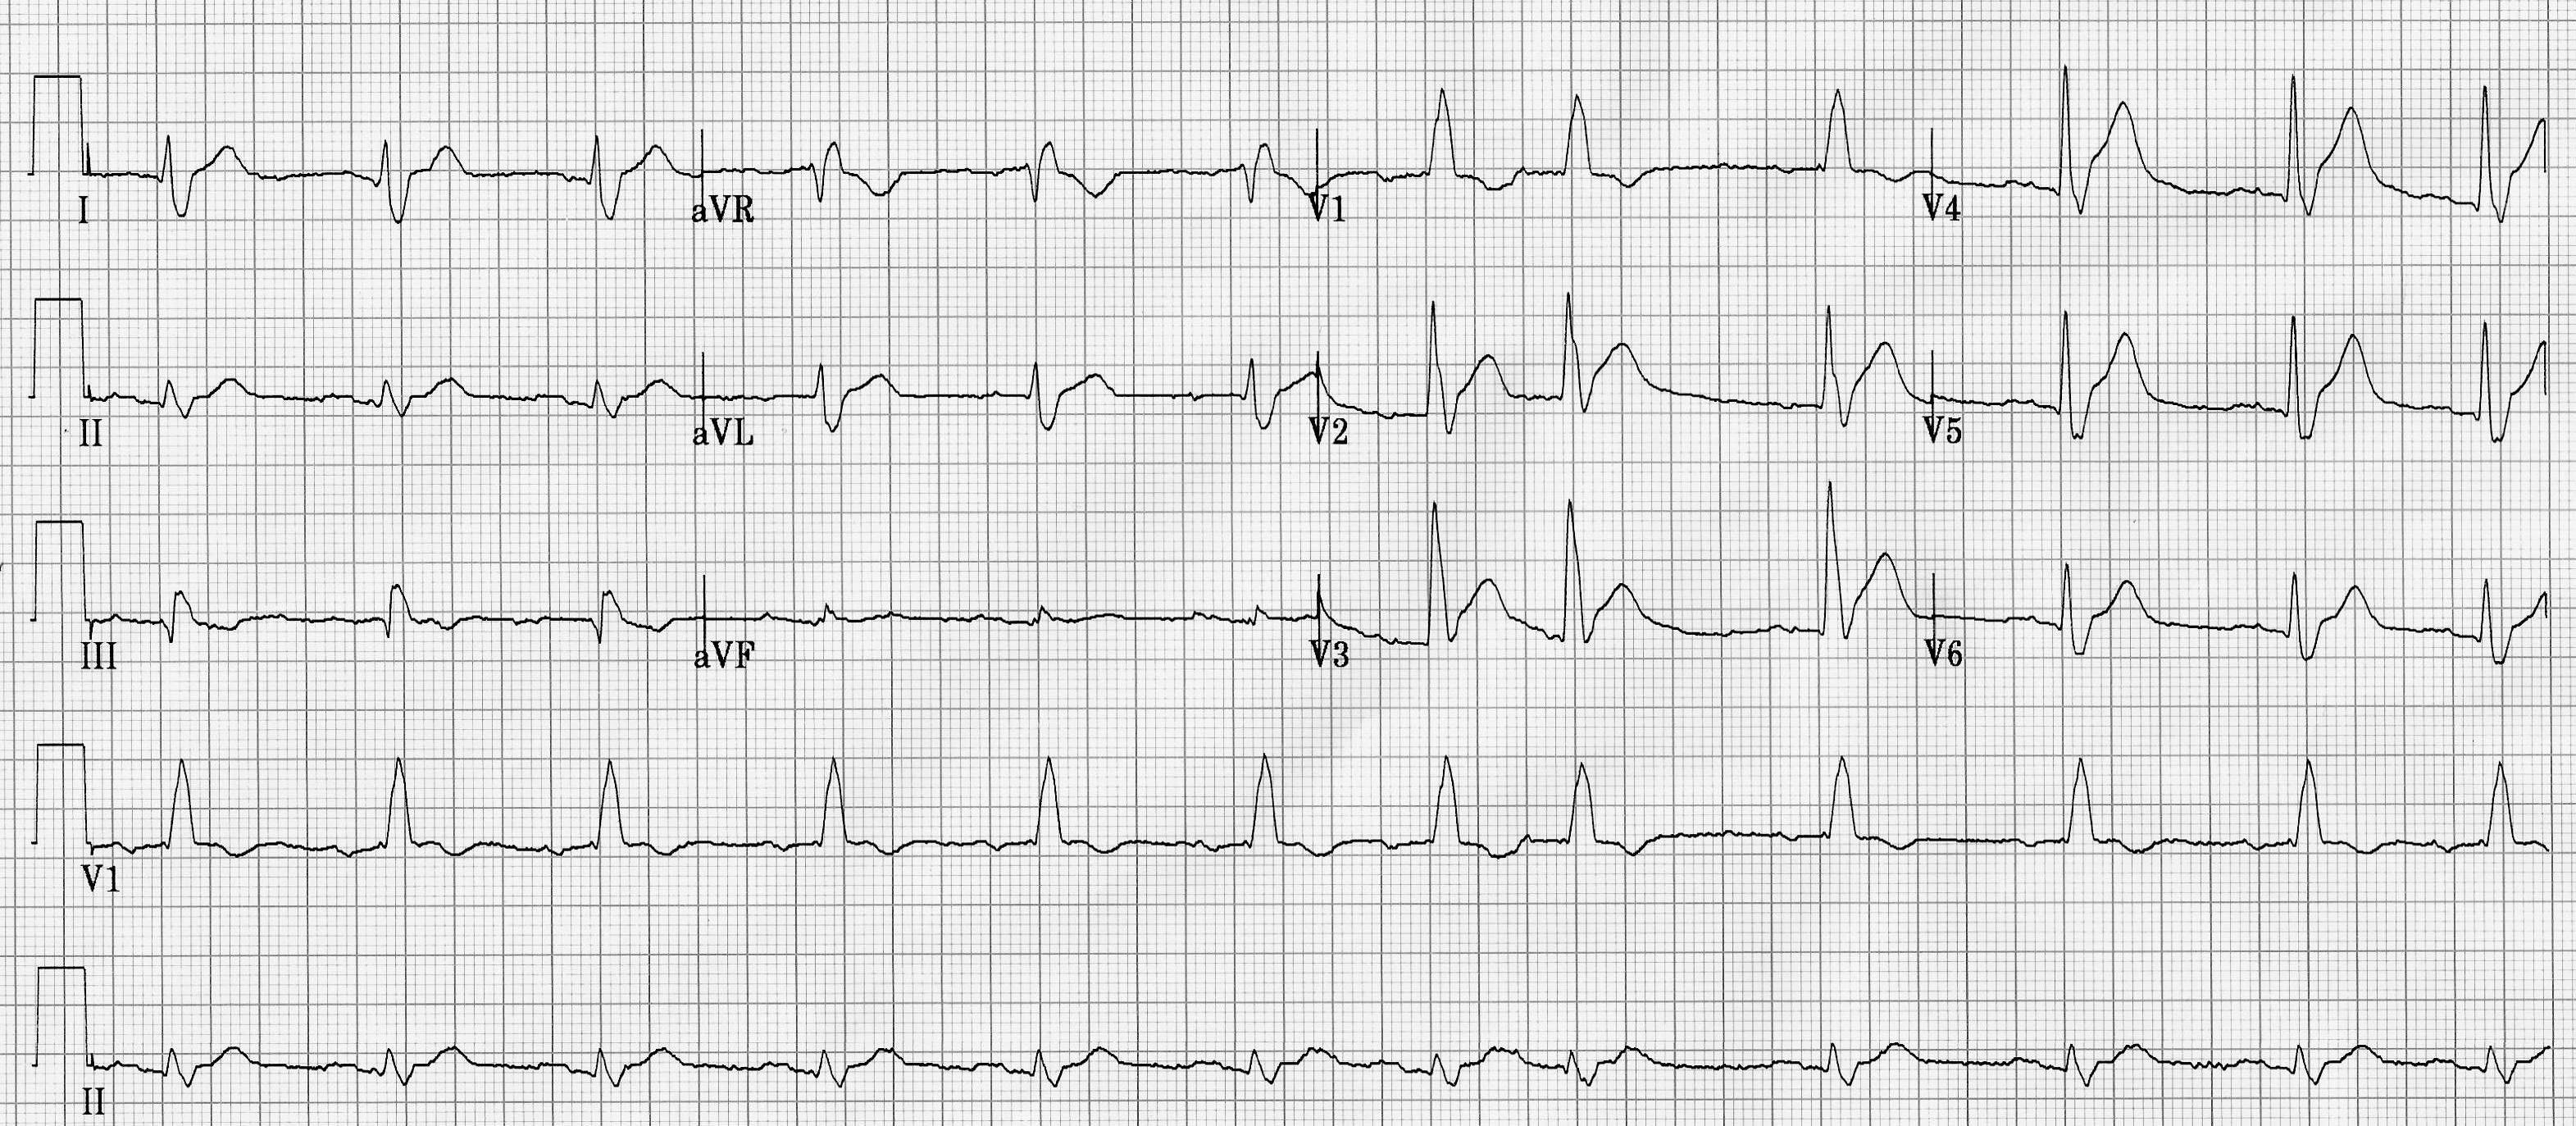 EKG printout from patient featured in case report